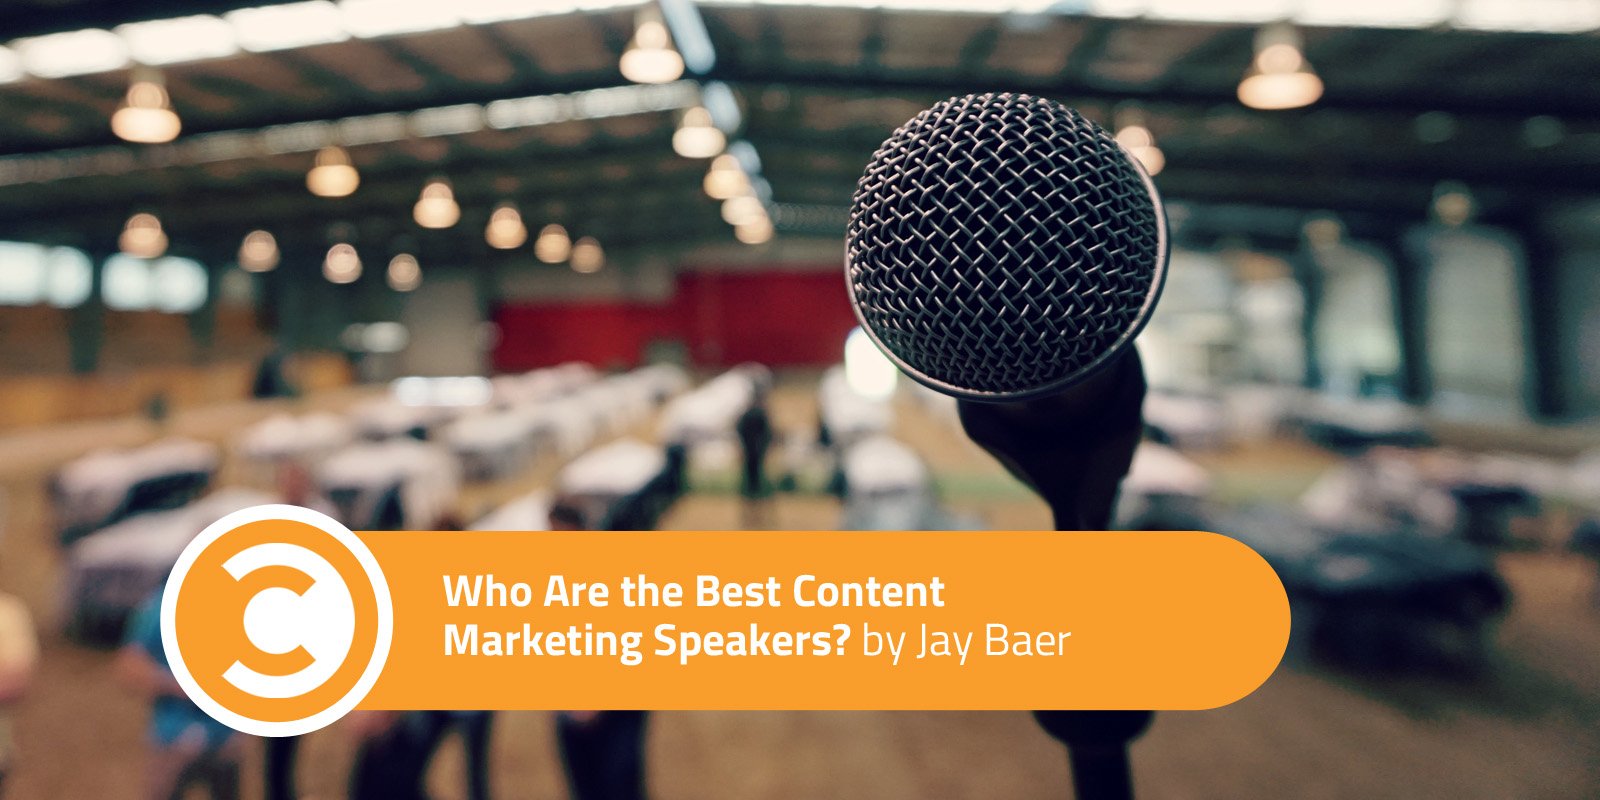 Who Are the Best Content Marketing Speakers